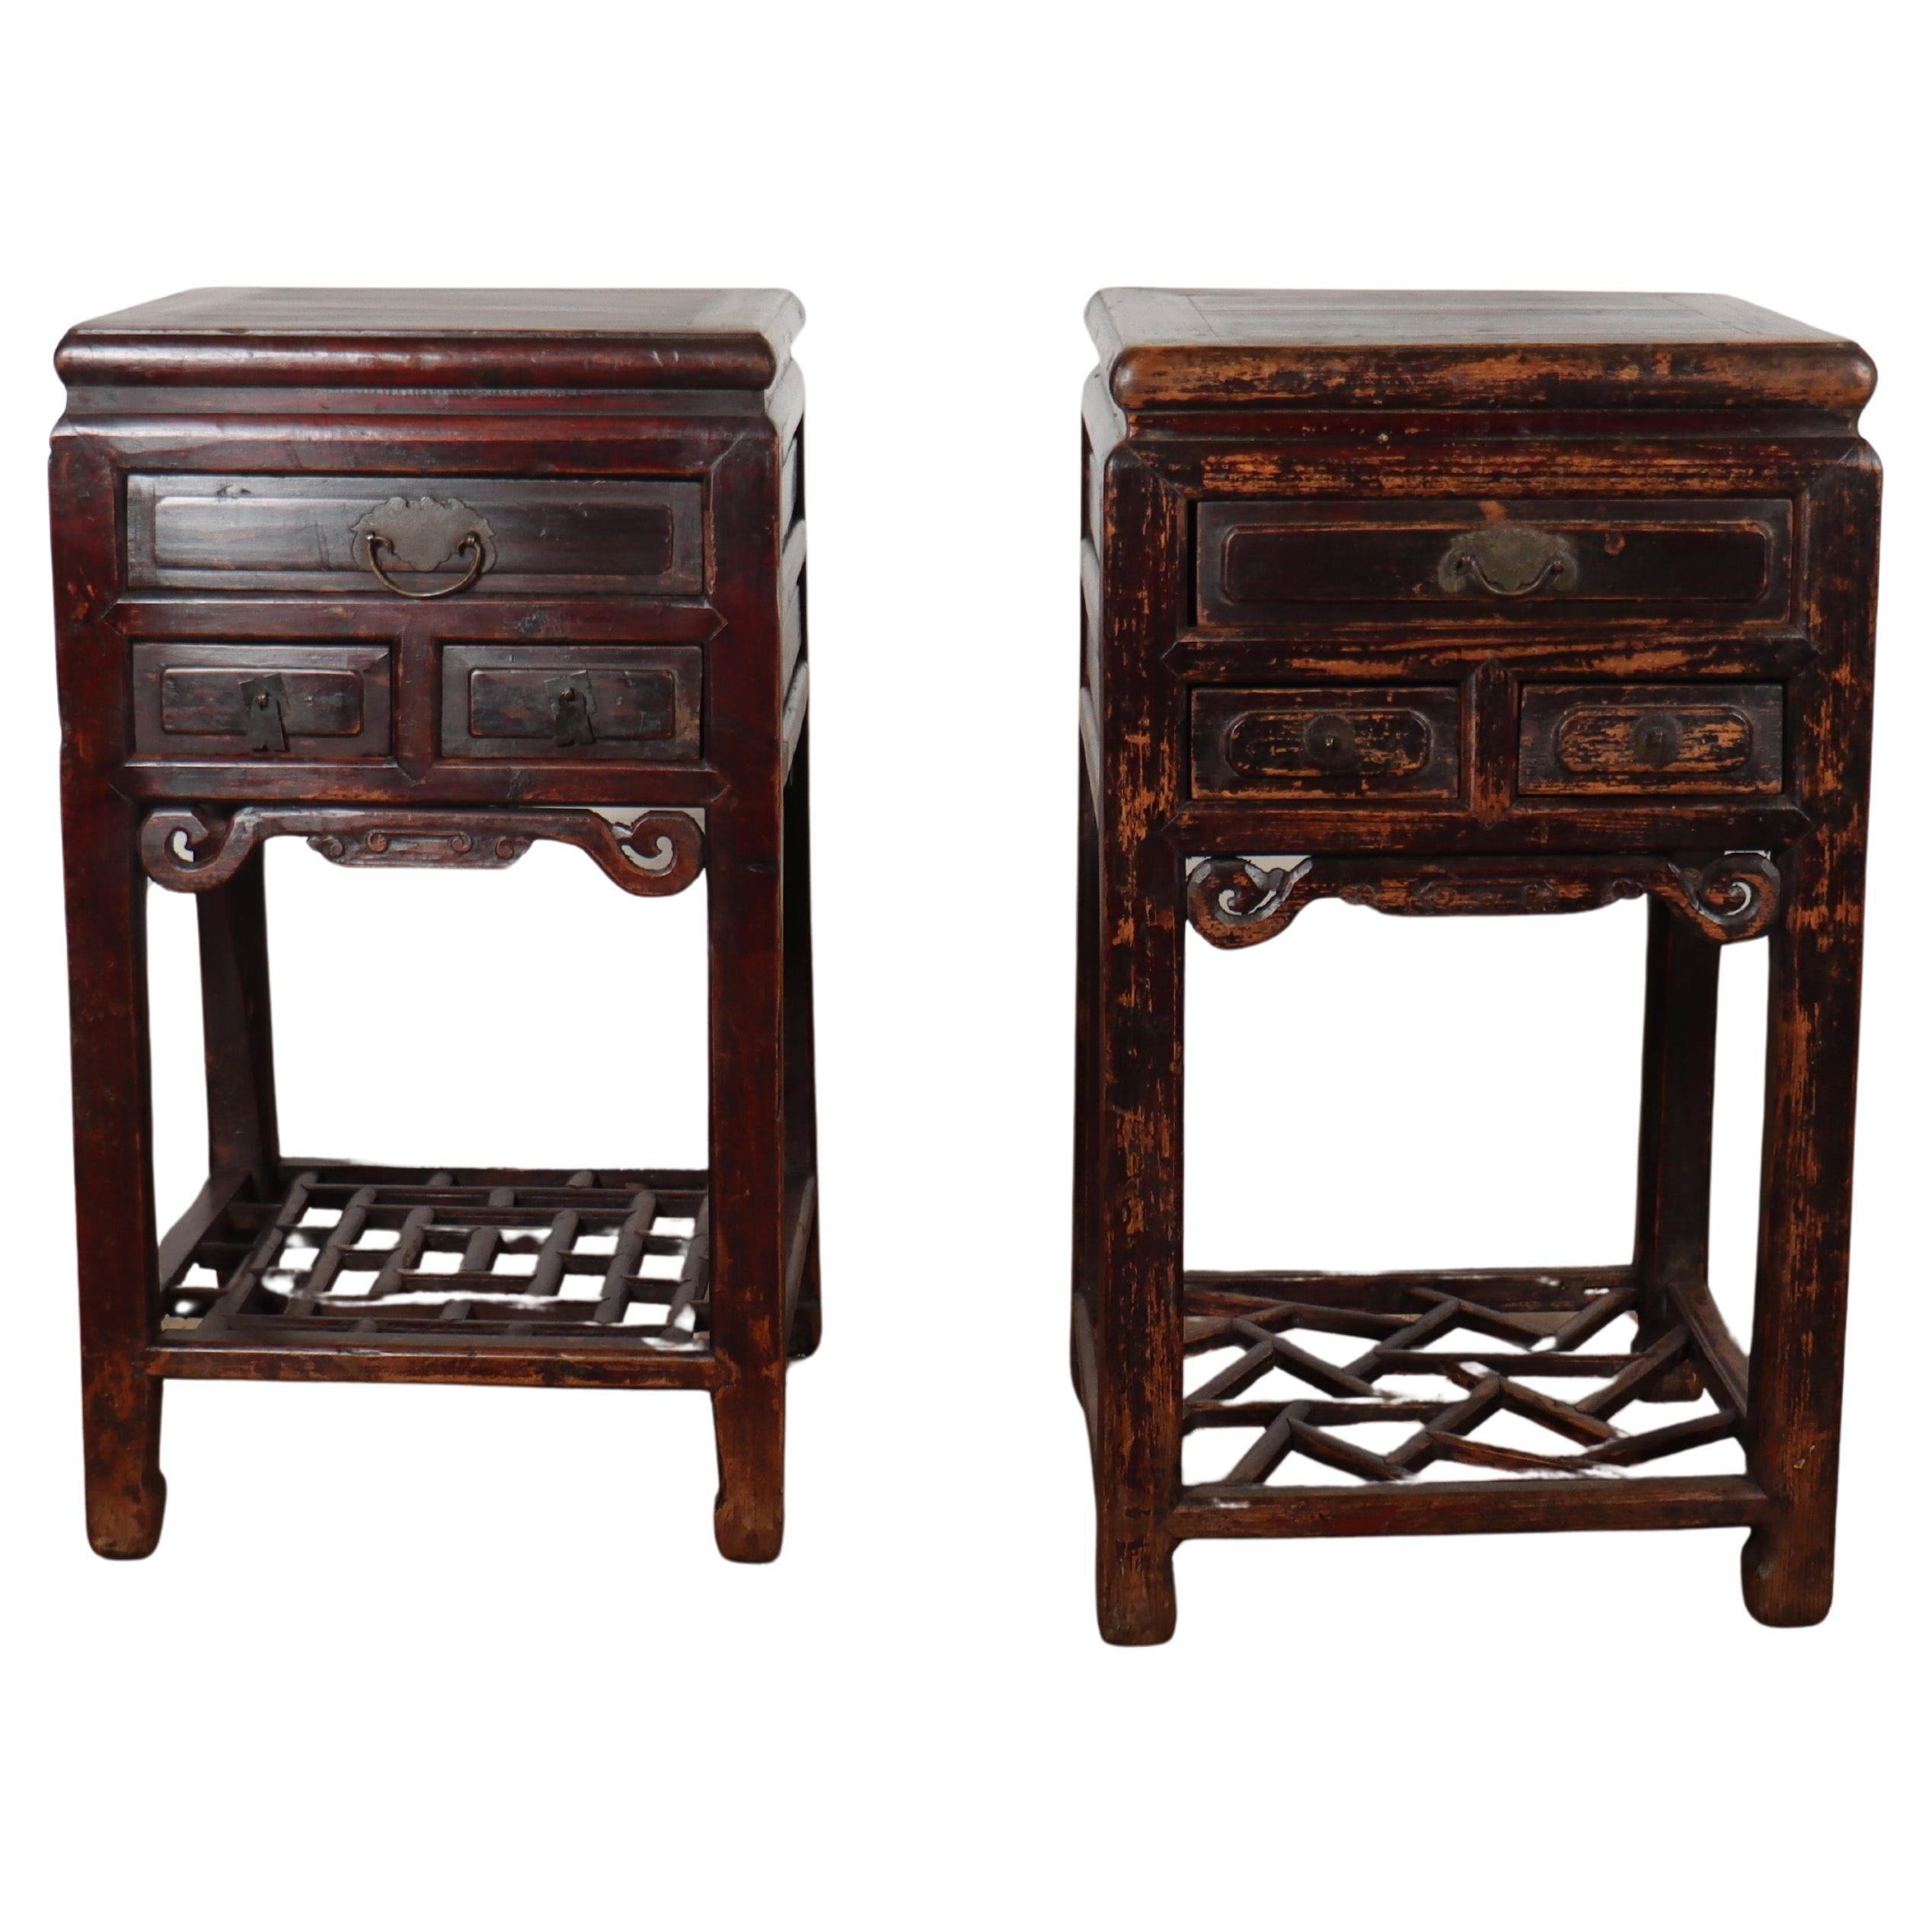 Pair of Chinese Bedside Tables